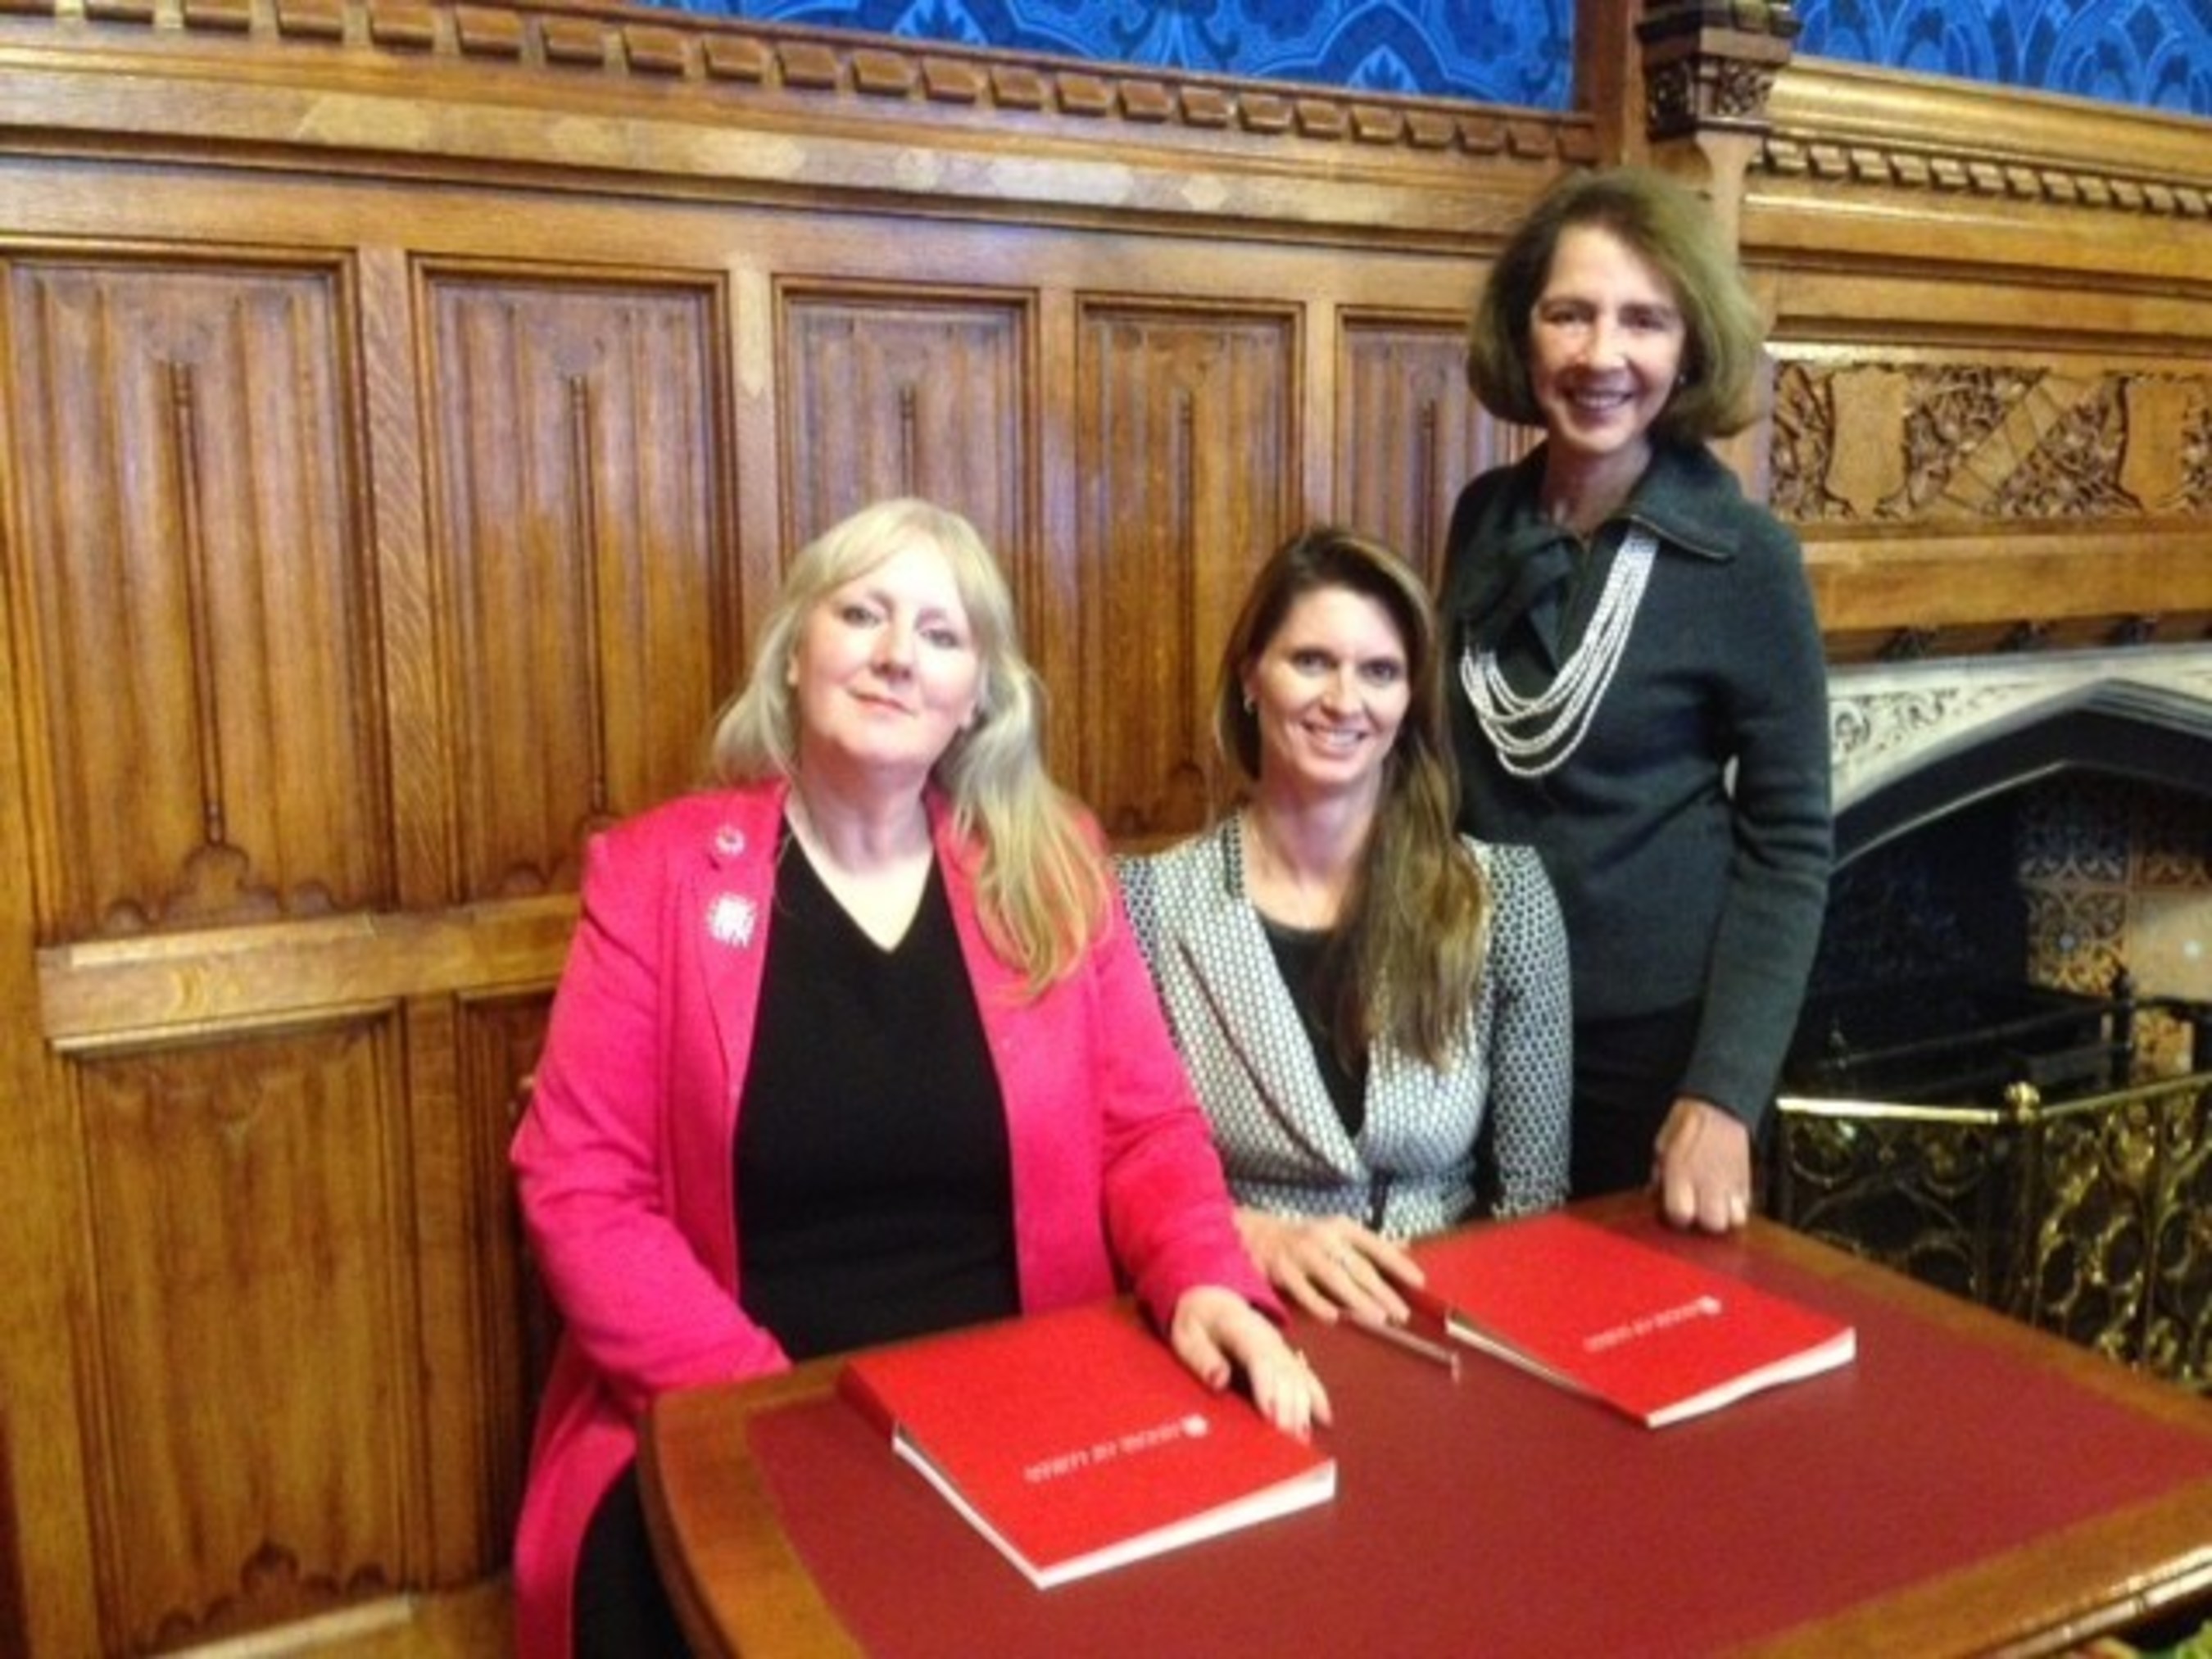 From left, Pink Shoe Club Helene Martin Gee, joins Women Impacting Public Policy Chair of the Board Jennifer Bisceglie (center) and WIPP Founder and President Barbara Kasoff, in London to sign agreement to launching WIPP International. Bisceglie will serve as President of WIPP International.